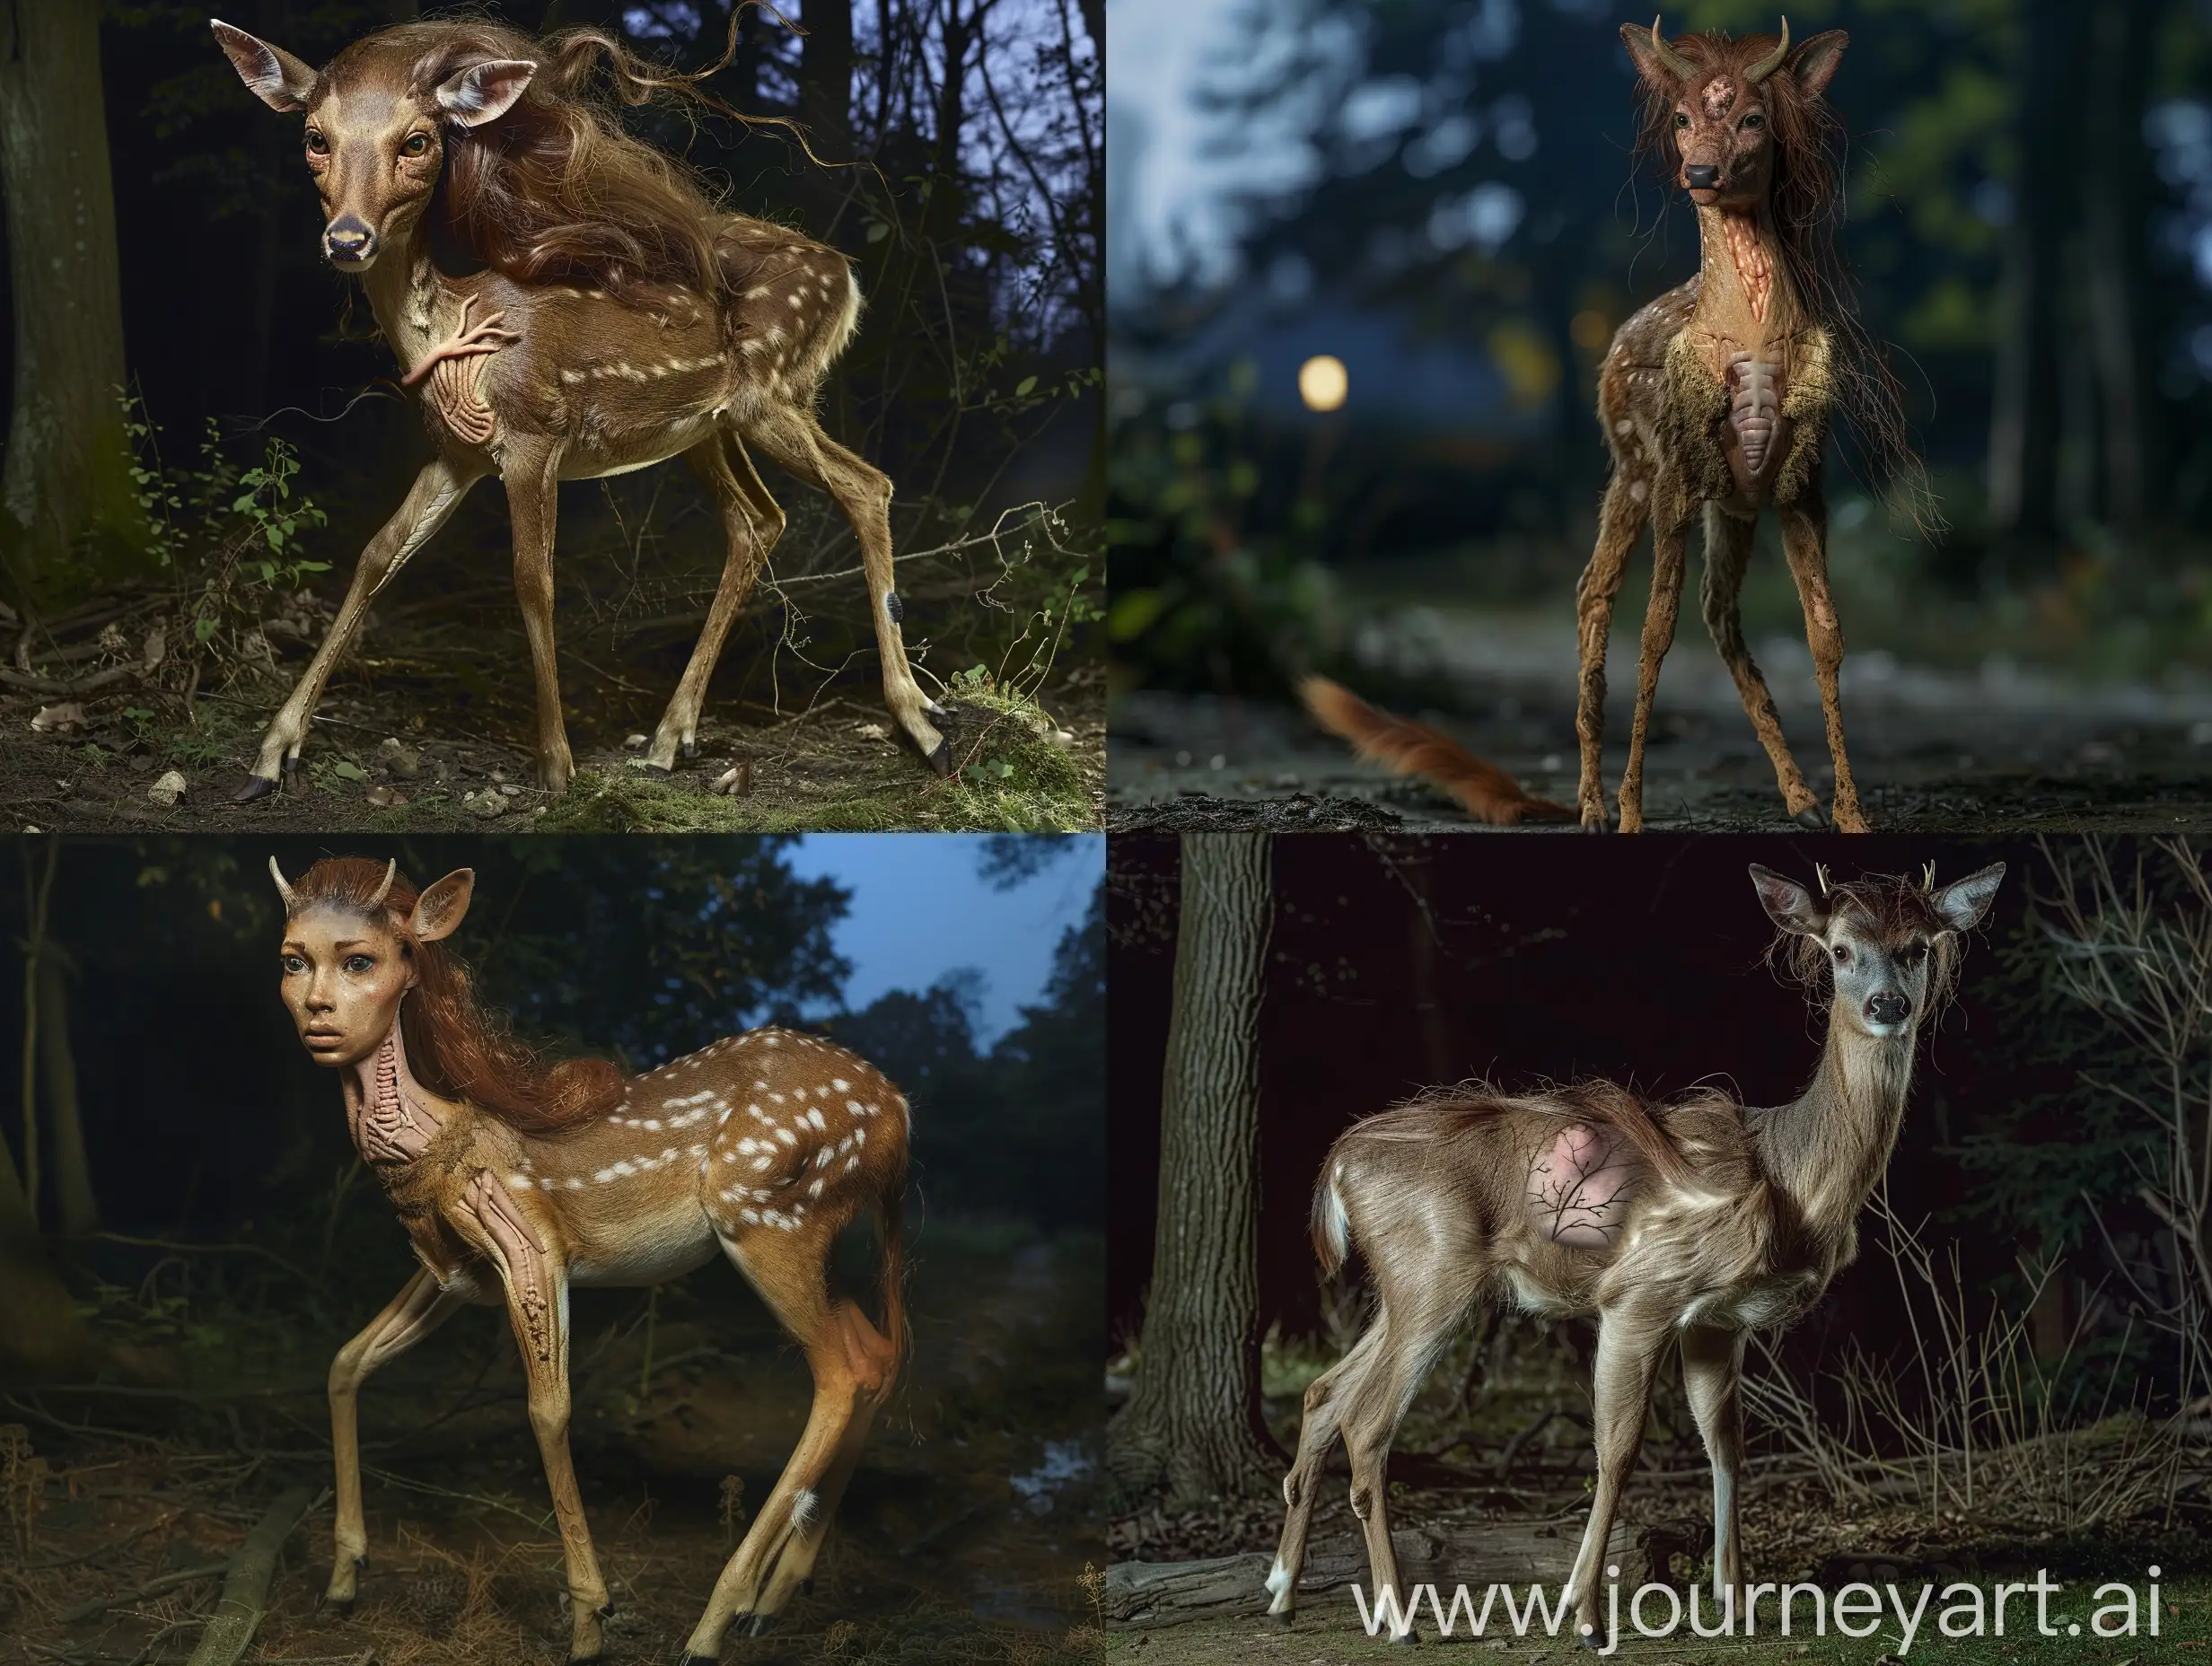 Majestic-Deer-with-HumanLike-Features-in-Enchanted-Night-Forest